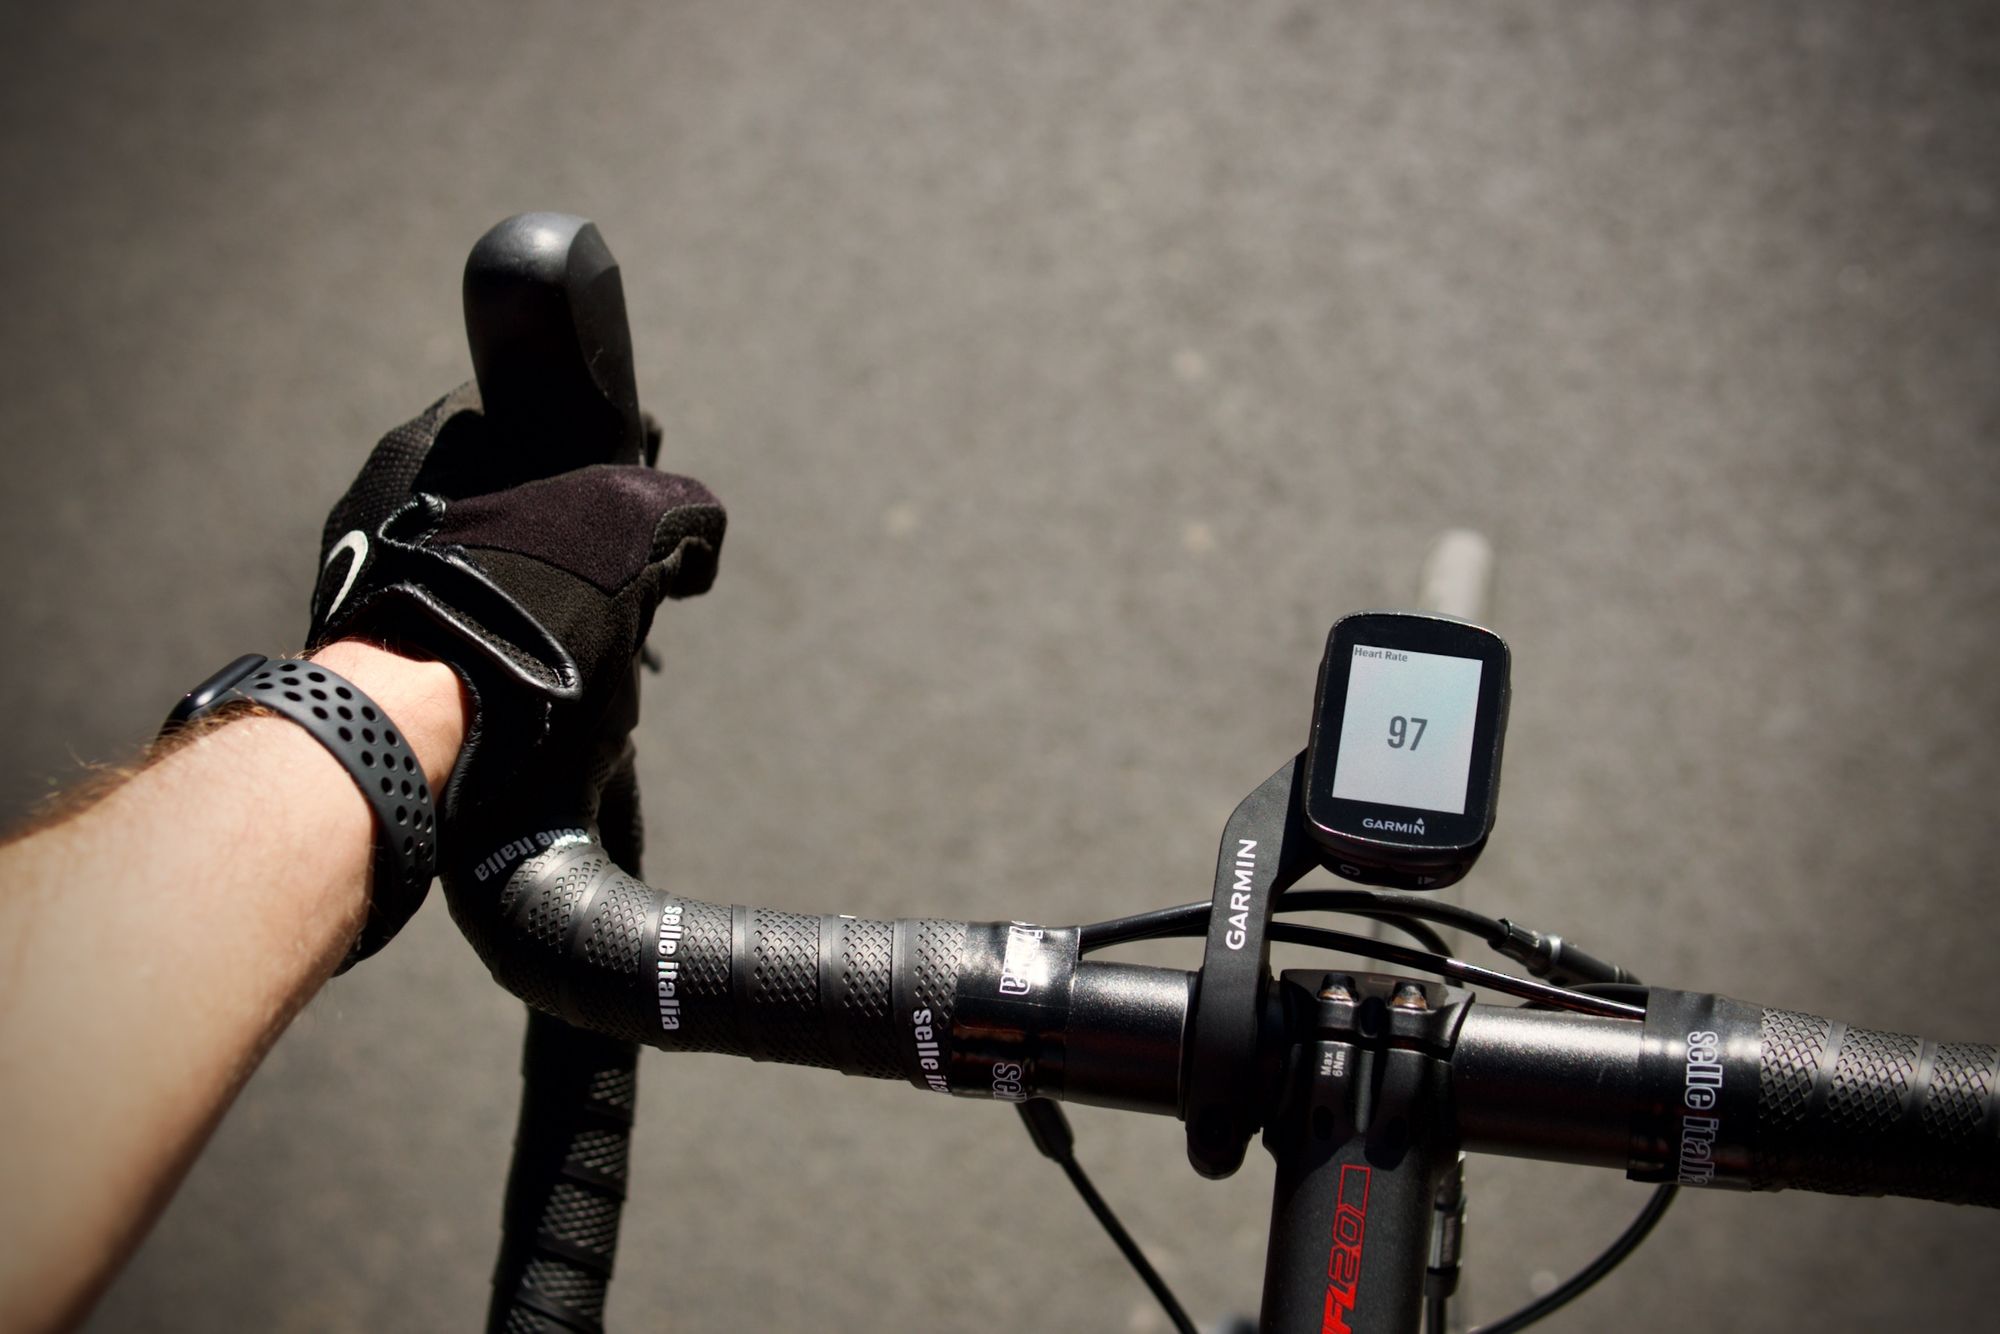 I Developed an App to Connect My Apple Watch to a Garmin, Wahoo, or Any Other BLE Bike Computer